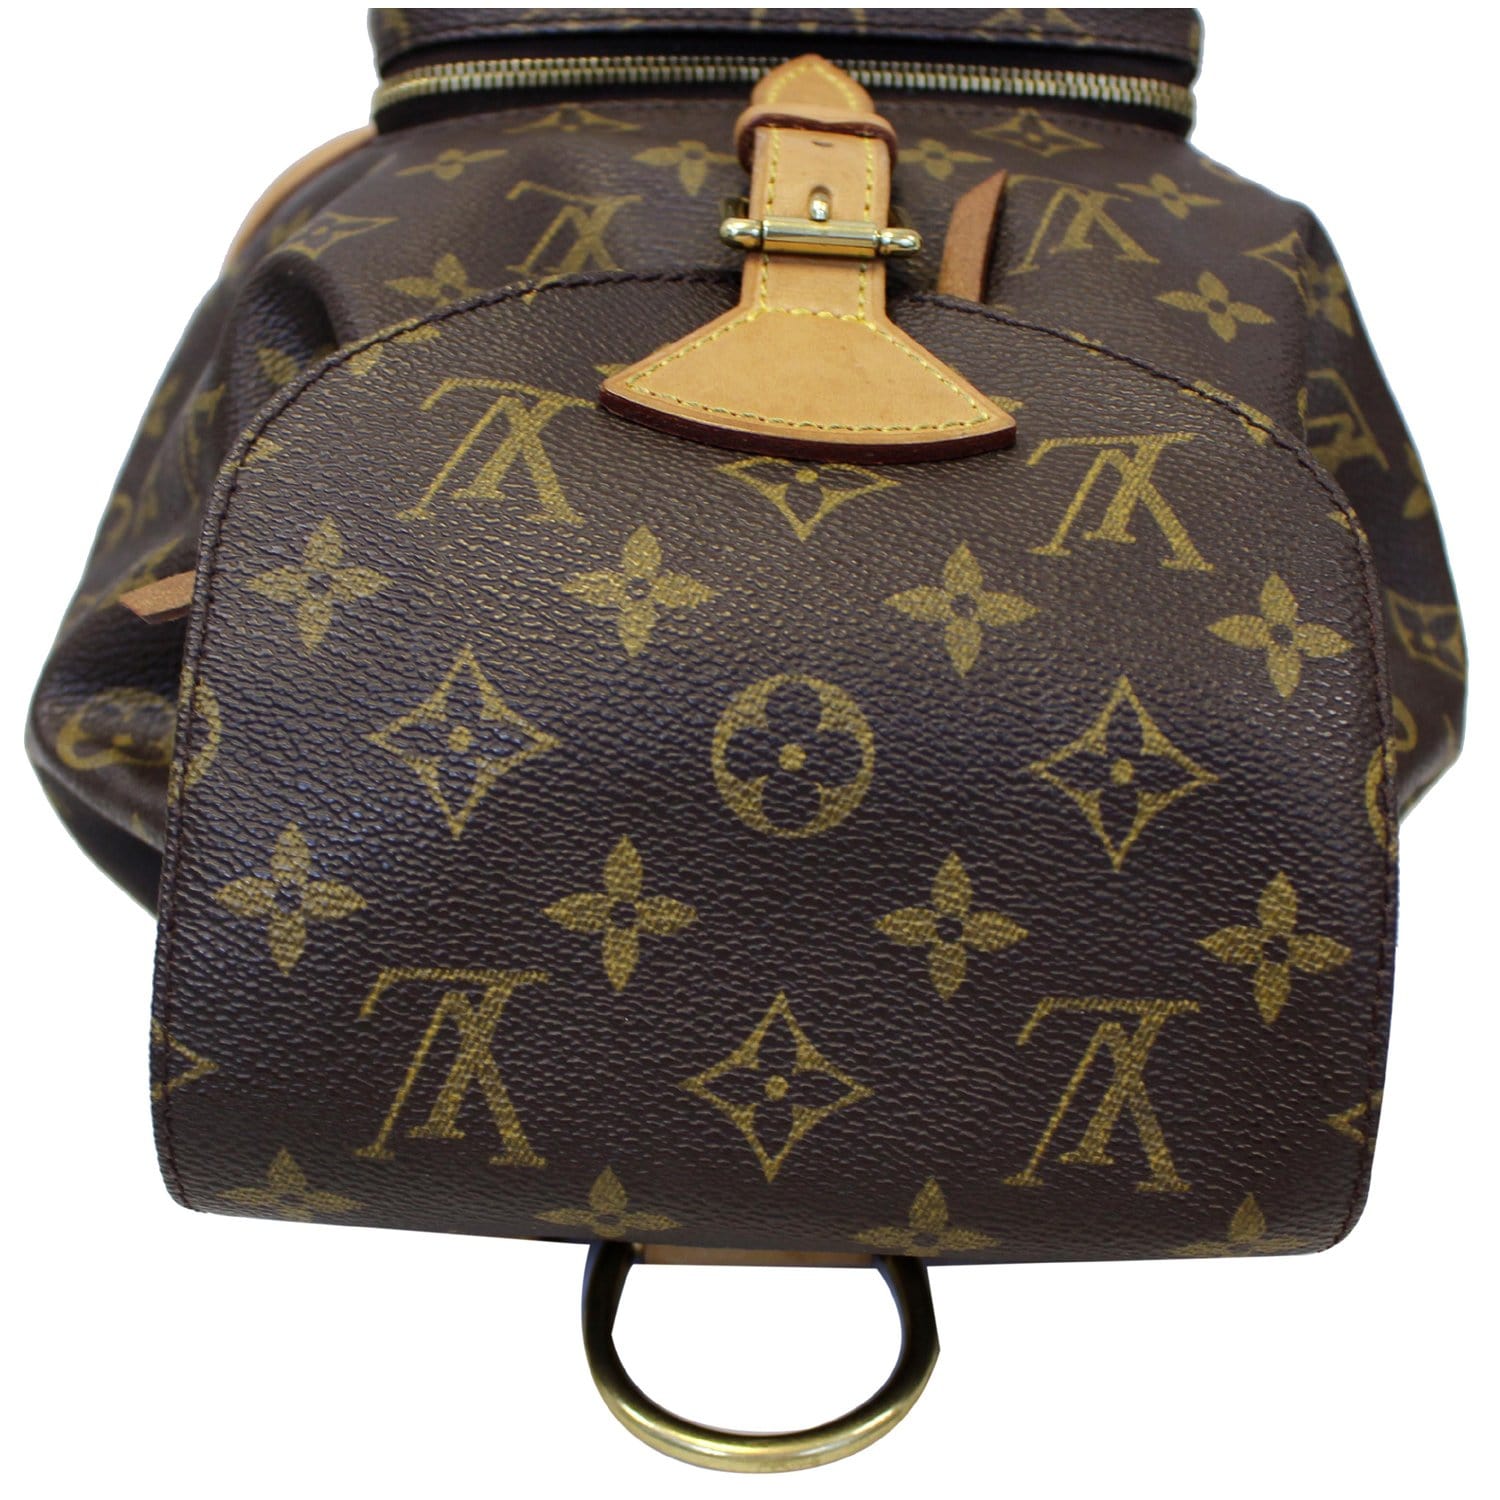 Montsouris Backpack Monogram Other Canvas - Bags M22534